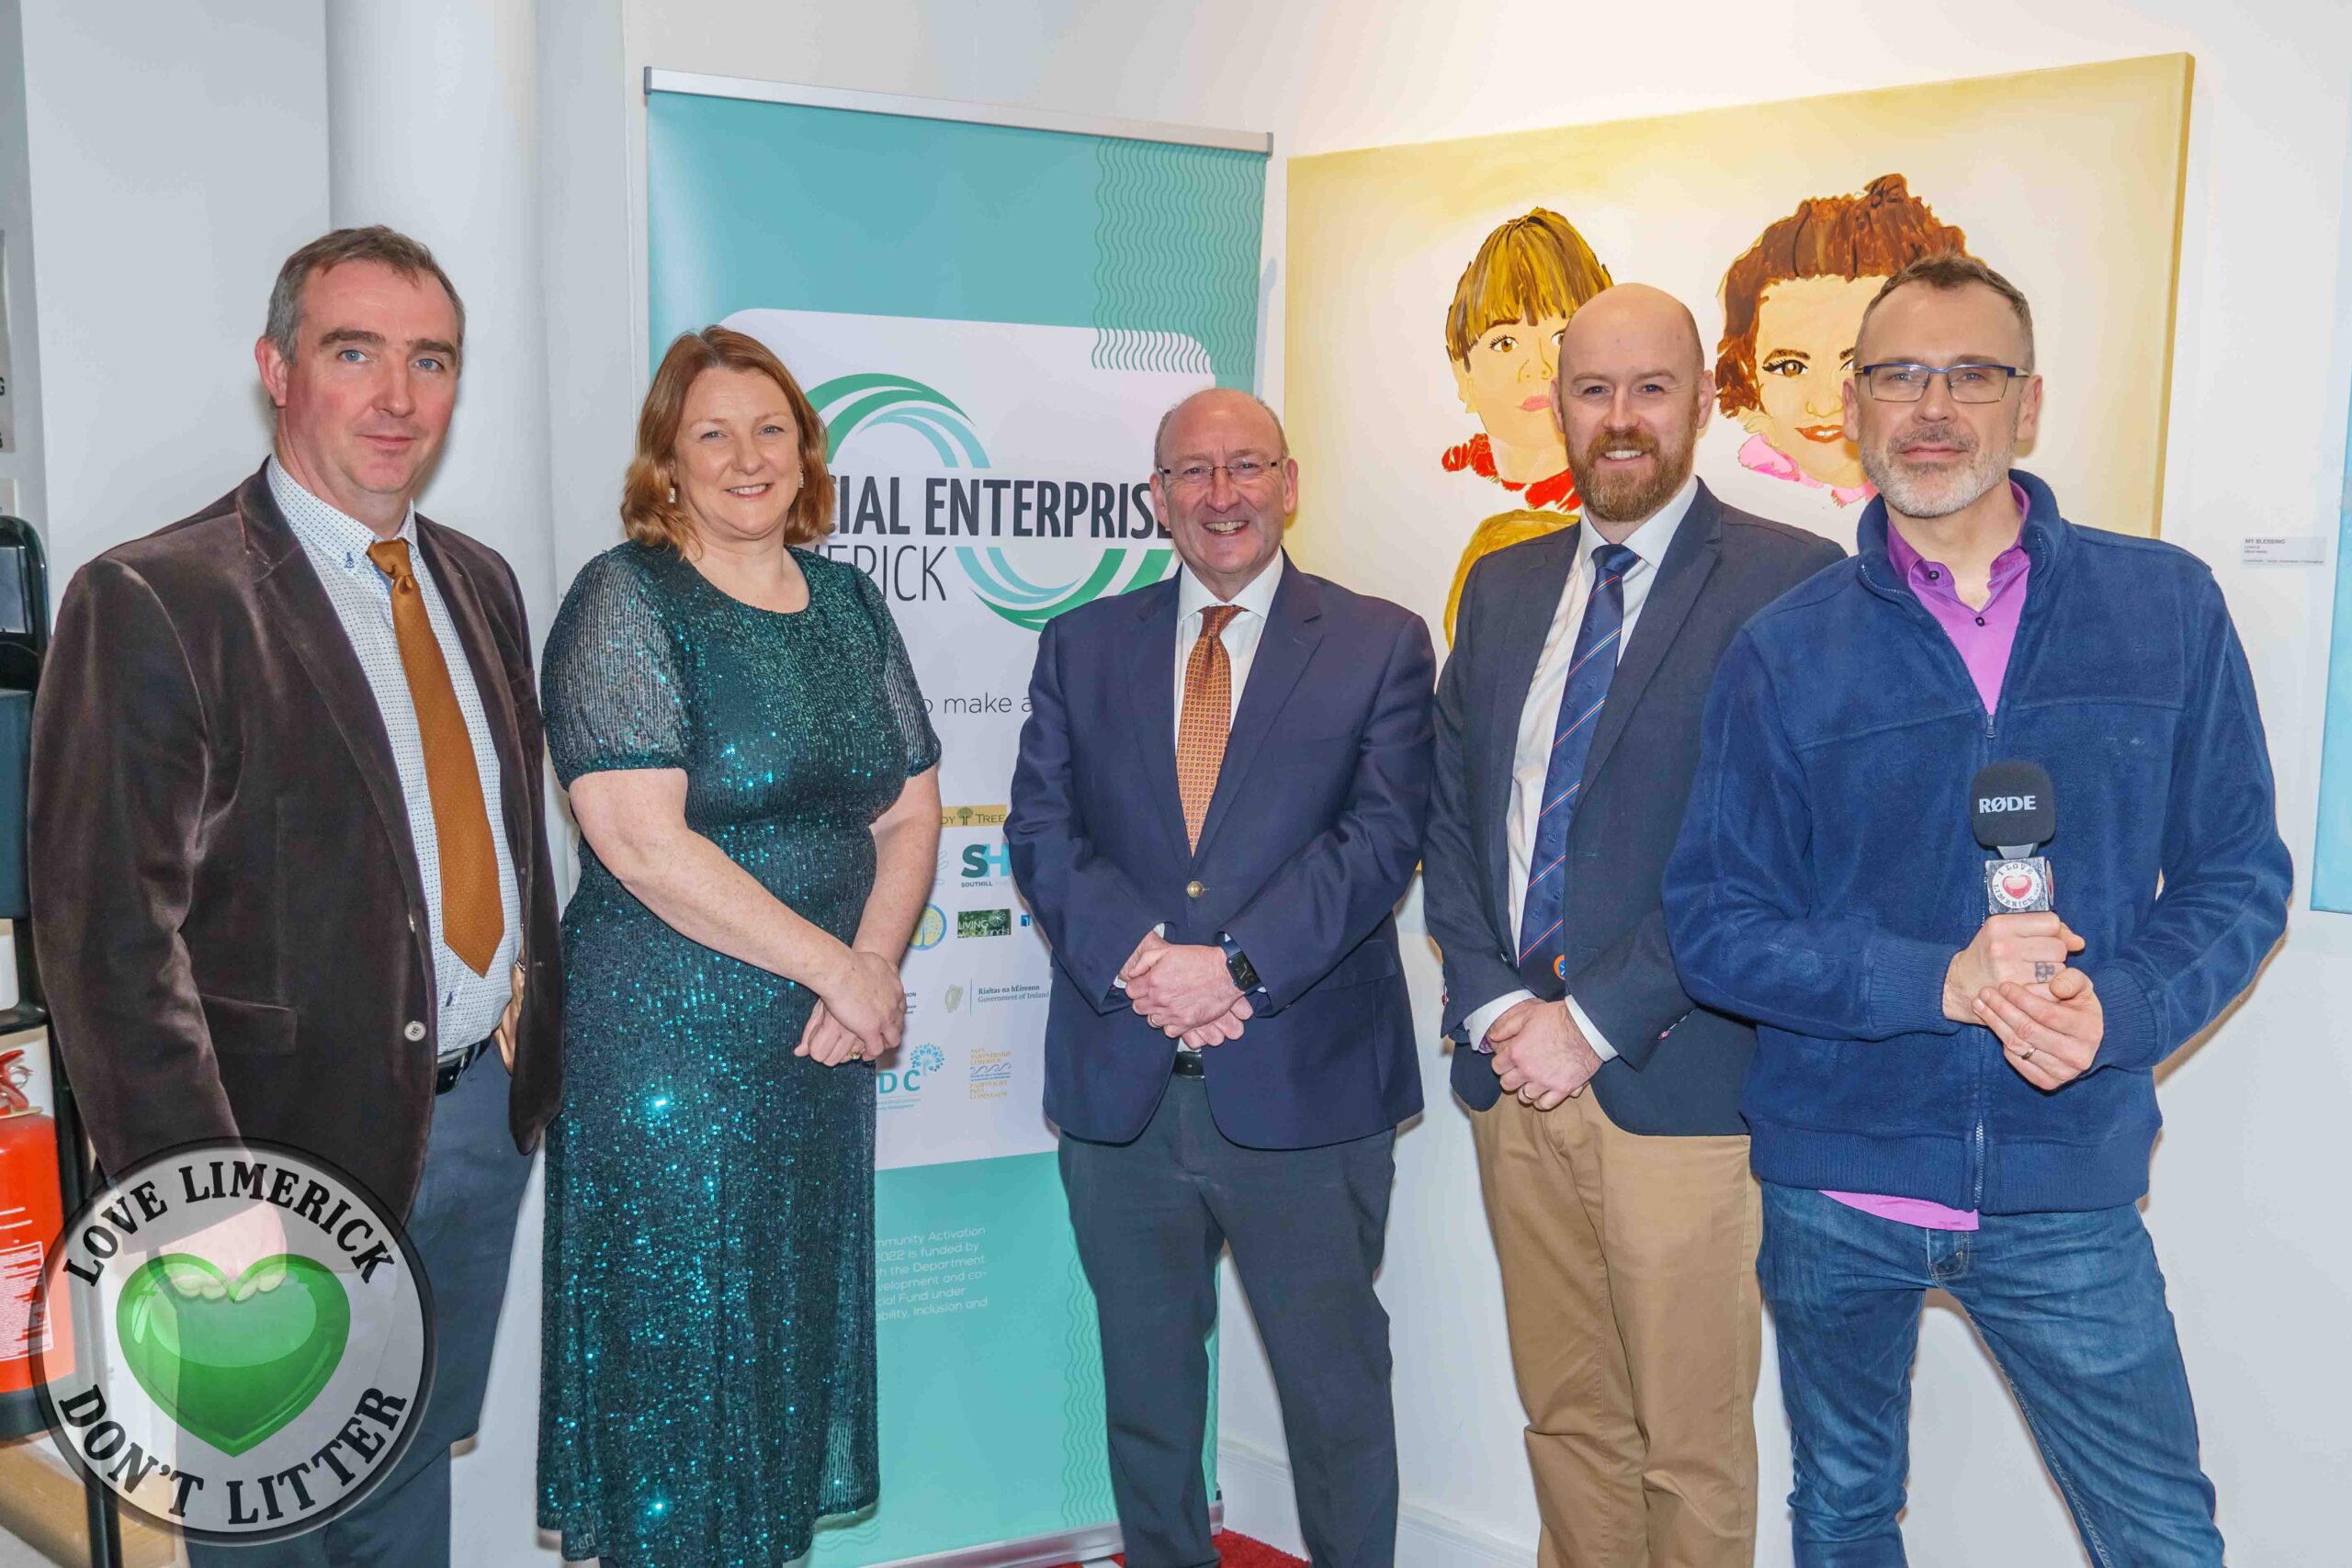 Social Enterprise Limerick promotes and inspires social change by supporting local enterprises to promote themselves